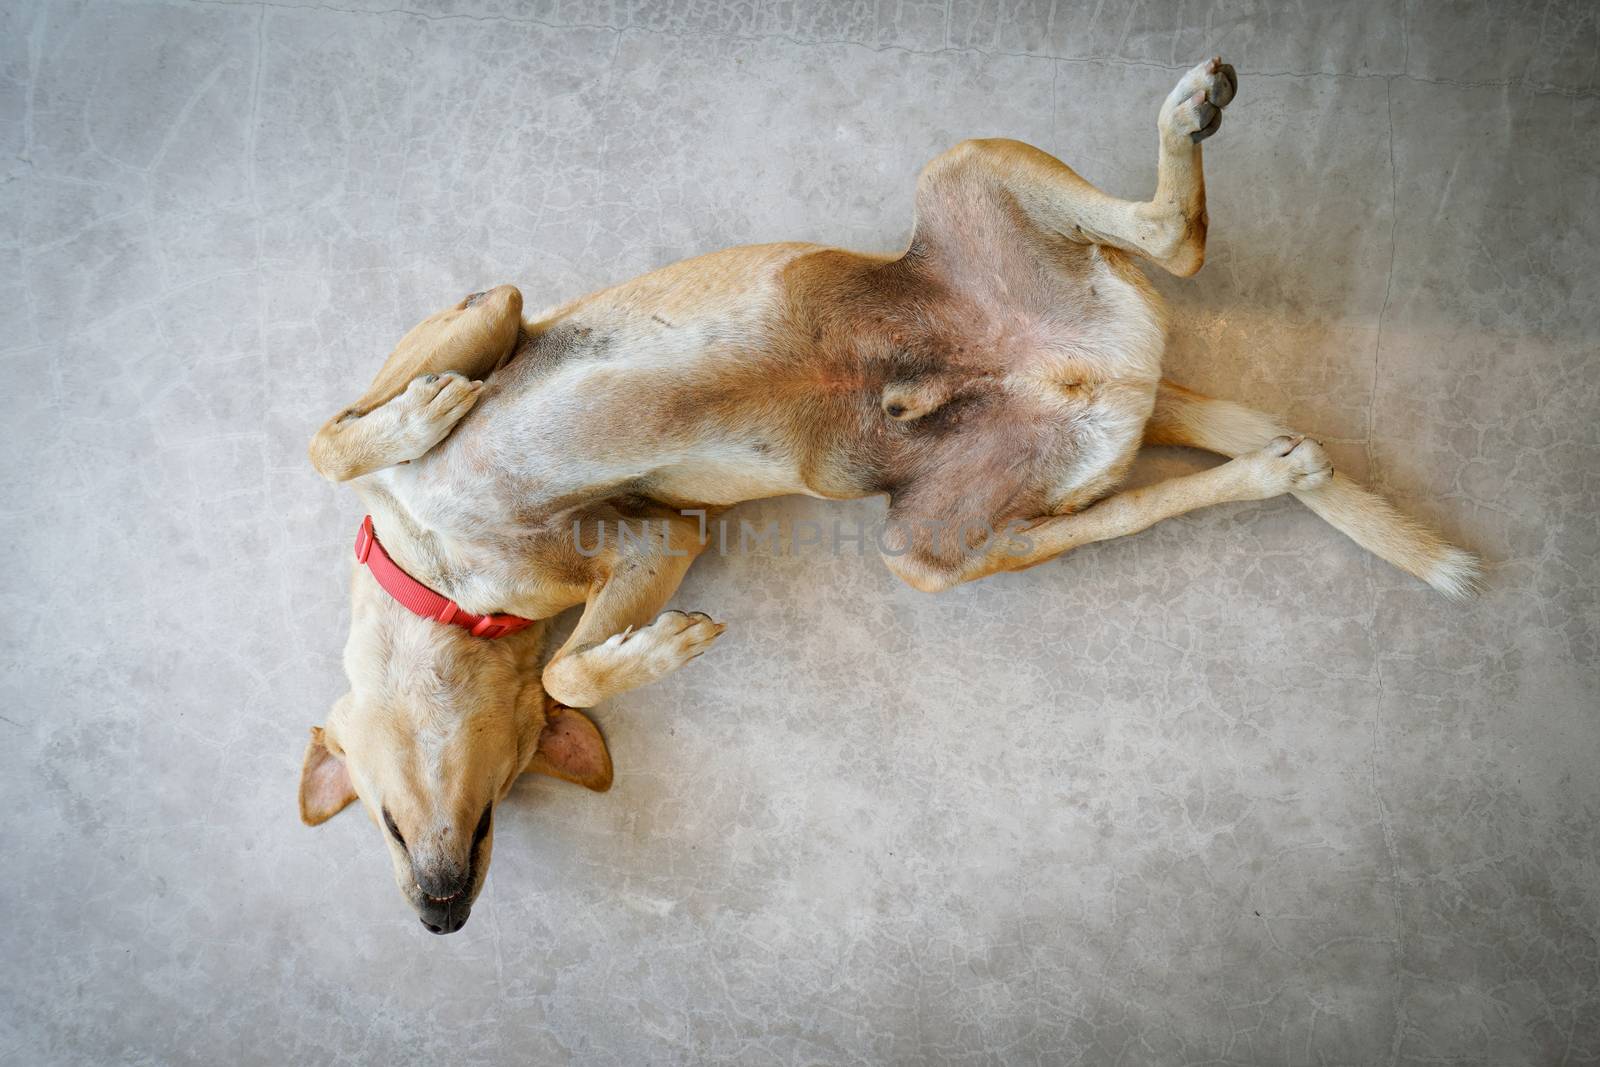 Thai dog sleeping upside down on the cement floor by antpkr